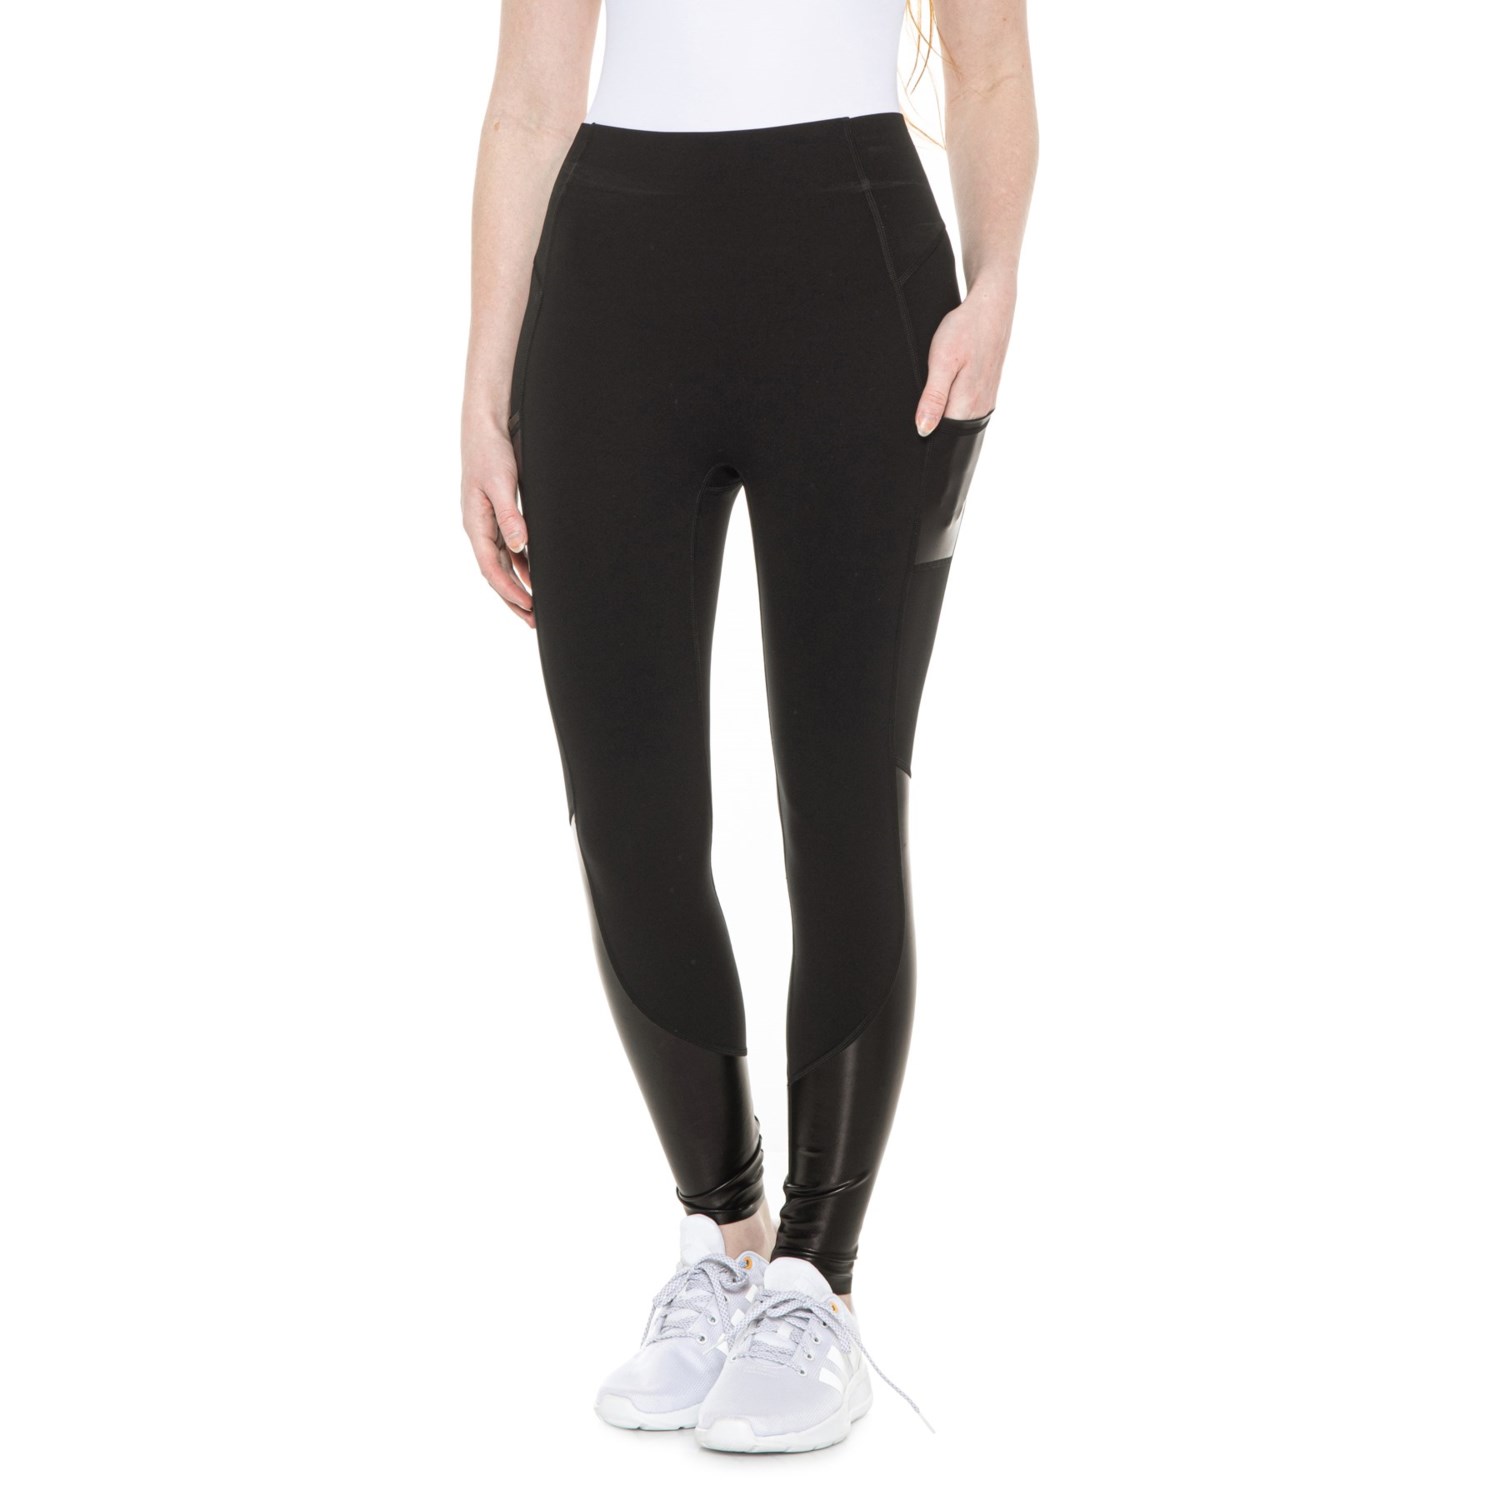 Women's Clearance SPANX Black Casual